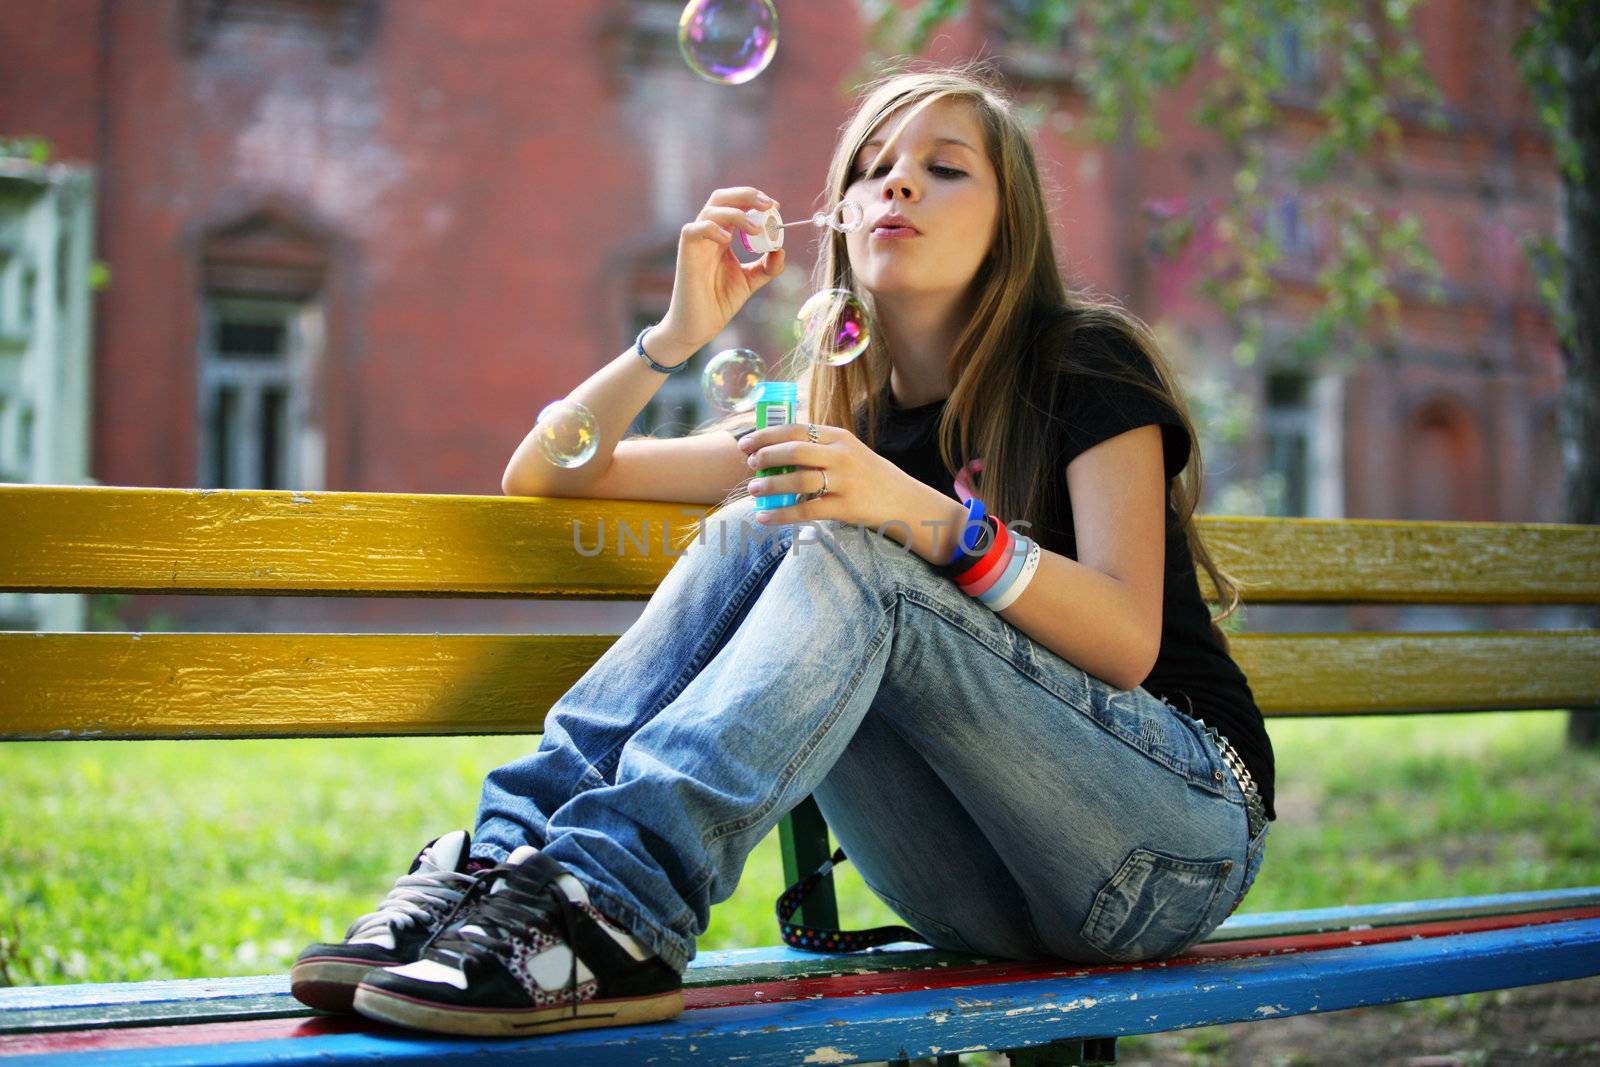 The young girl makes soap bubble